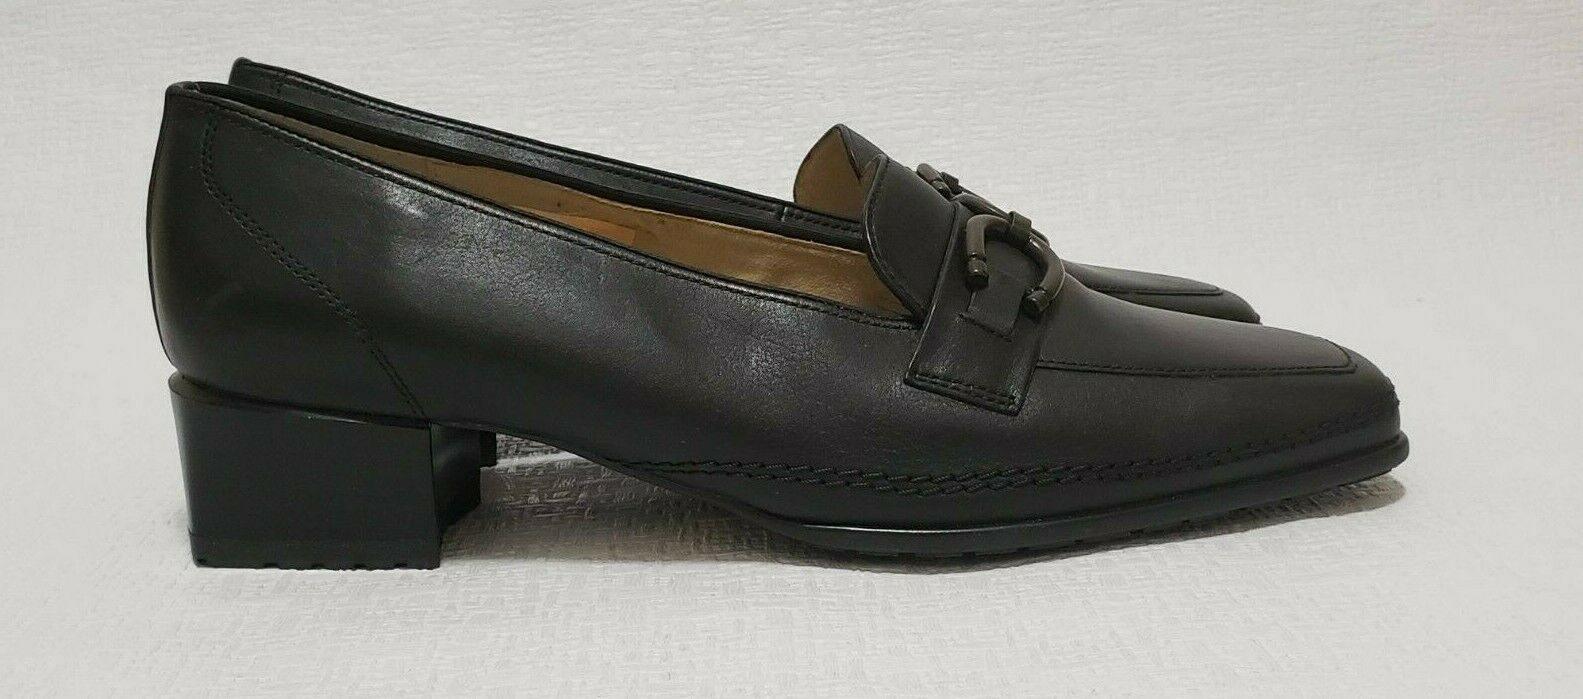 ara Women's Leather Black Loafers Relax Comfort Casual Shoes Size US 11 H  Wide - SVNYFancy